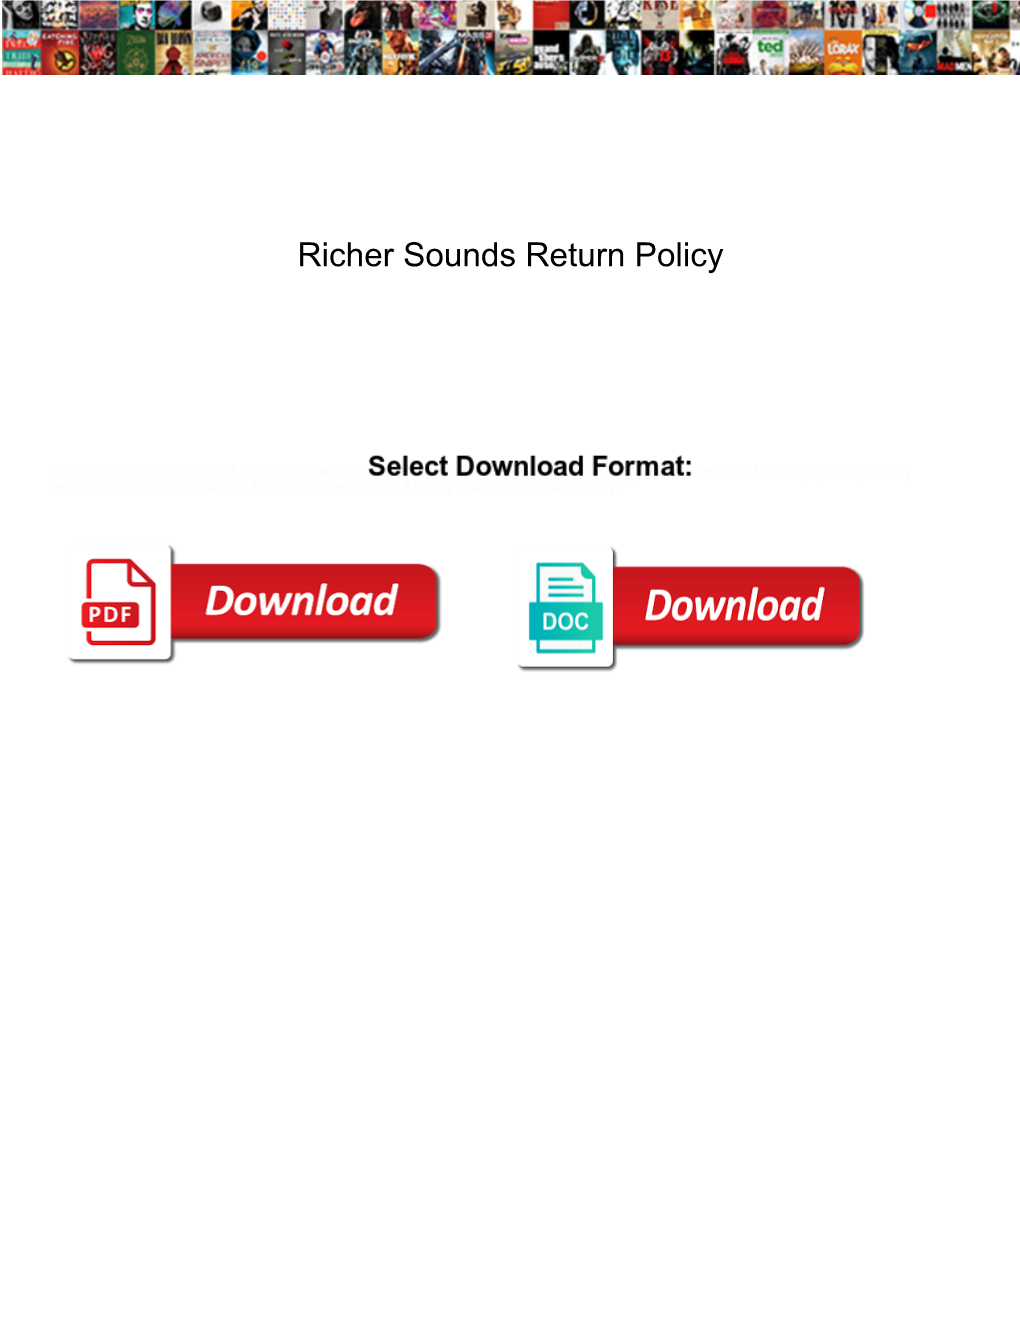 Richer Sounds Return Policy